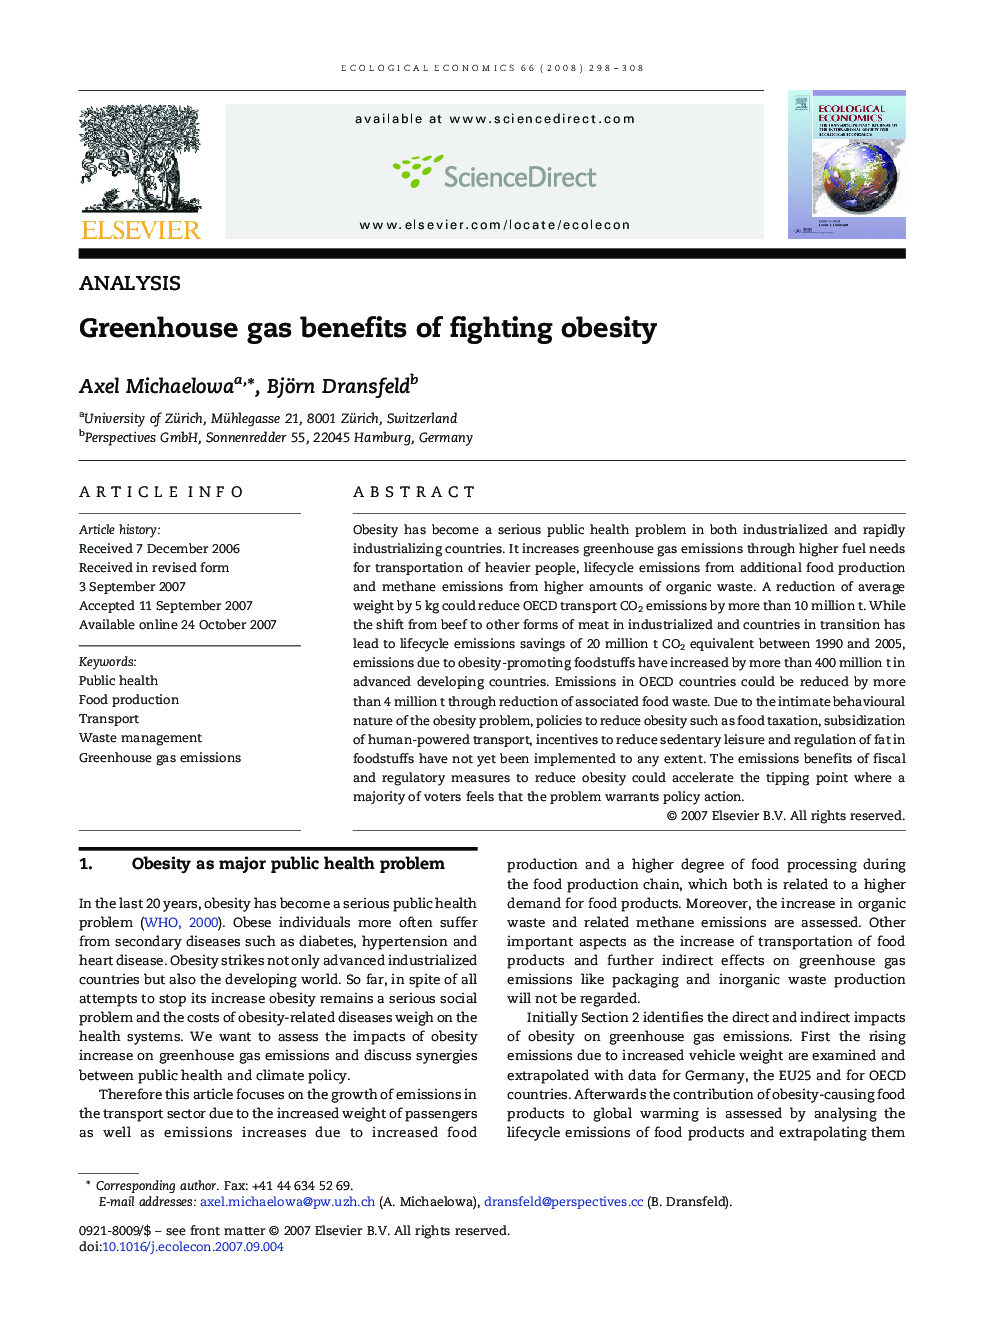 Greenhouse gas benefits of fighting obesity